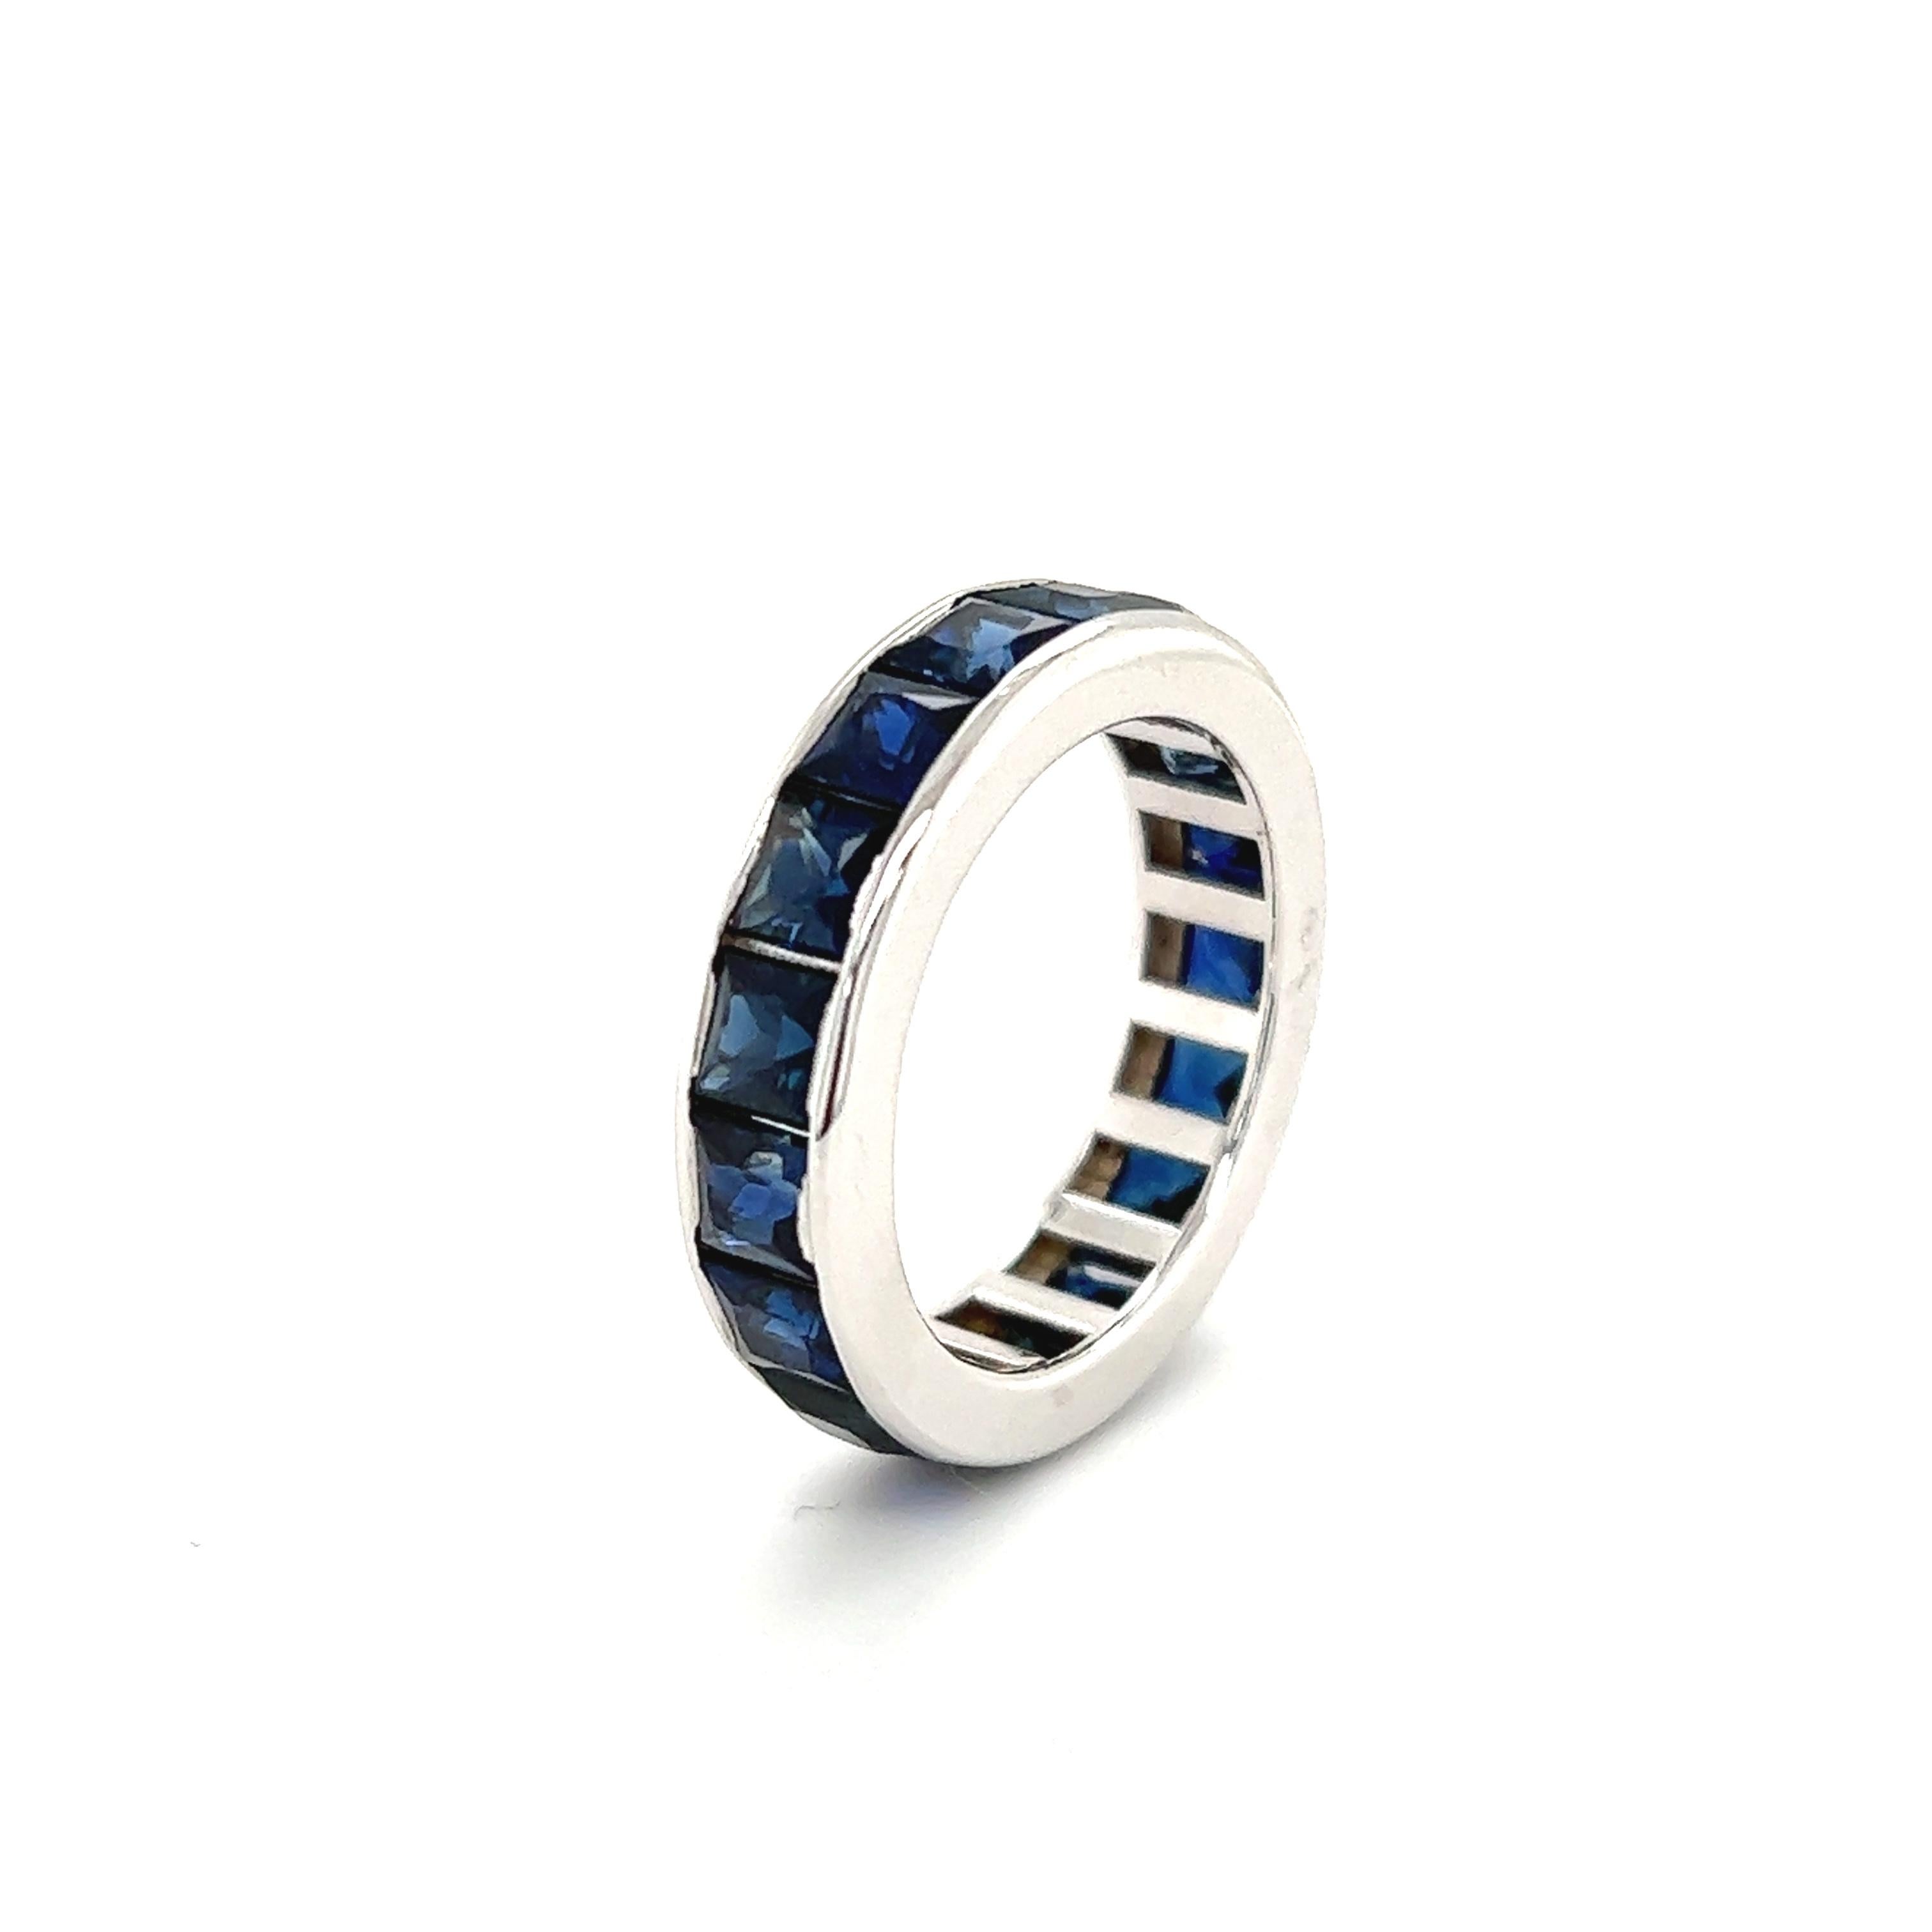 Gorgeous blue sapphire gemstone eternity band crafted in 18k white gold. The ring displays electric colored blue sapphires that pop off this one of a kind creation. There are 18 sapphires set in the ring, all princess cut gemstones that are matched